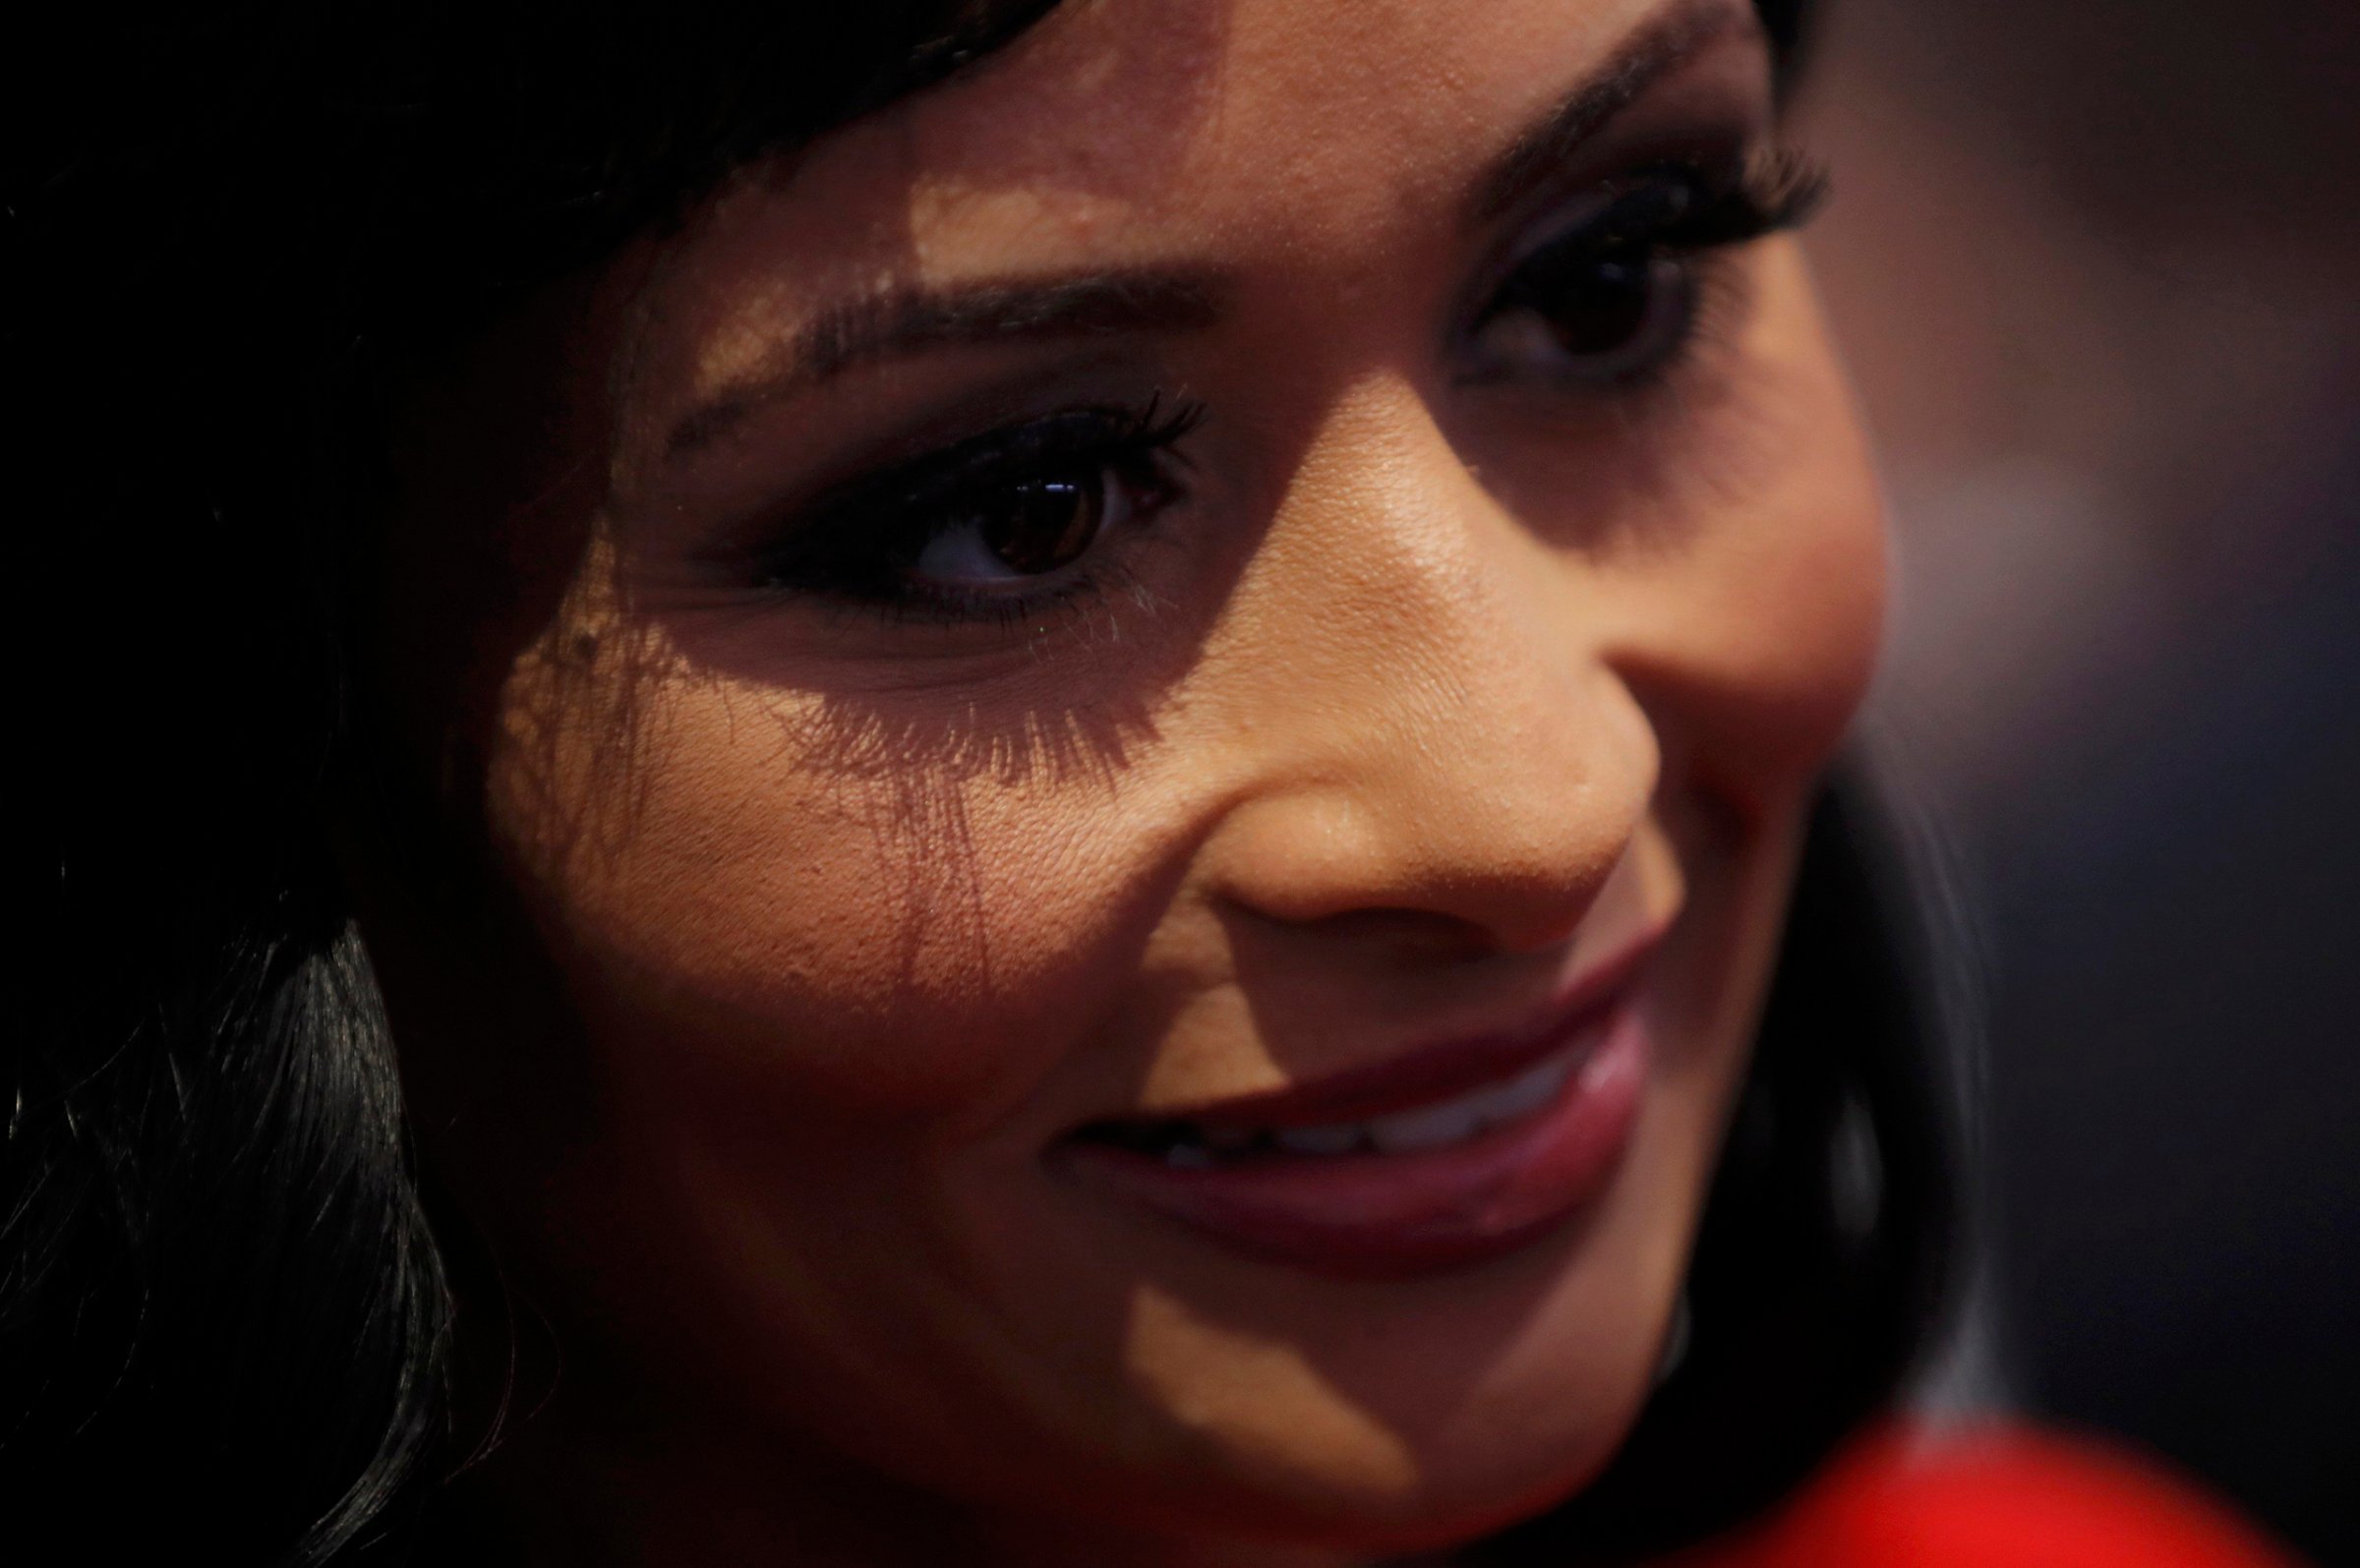 Republican presidential nominee Donald Trump's spokesperson Katrina Pierson speaks with delegates on the floor at the start of the final session of the Republican National Convention in Cleveland on July 21, 2016.